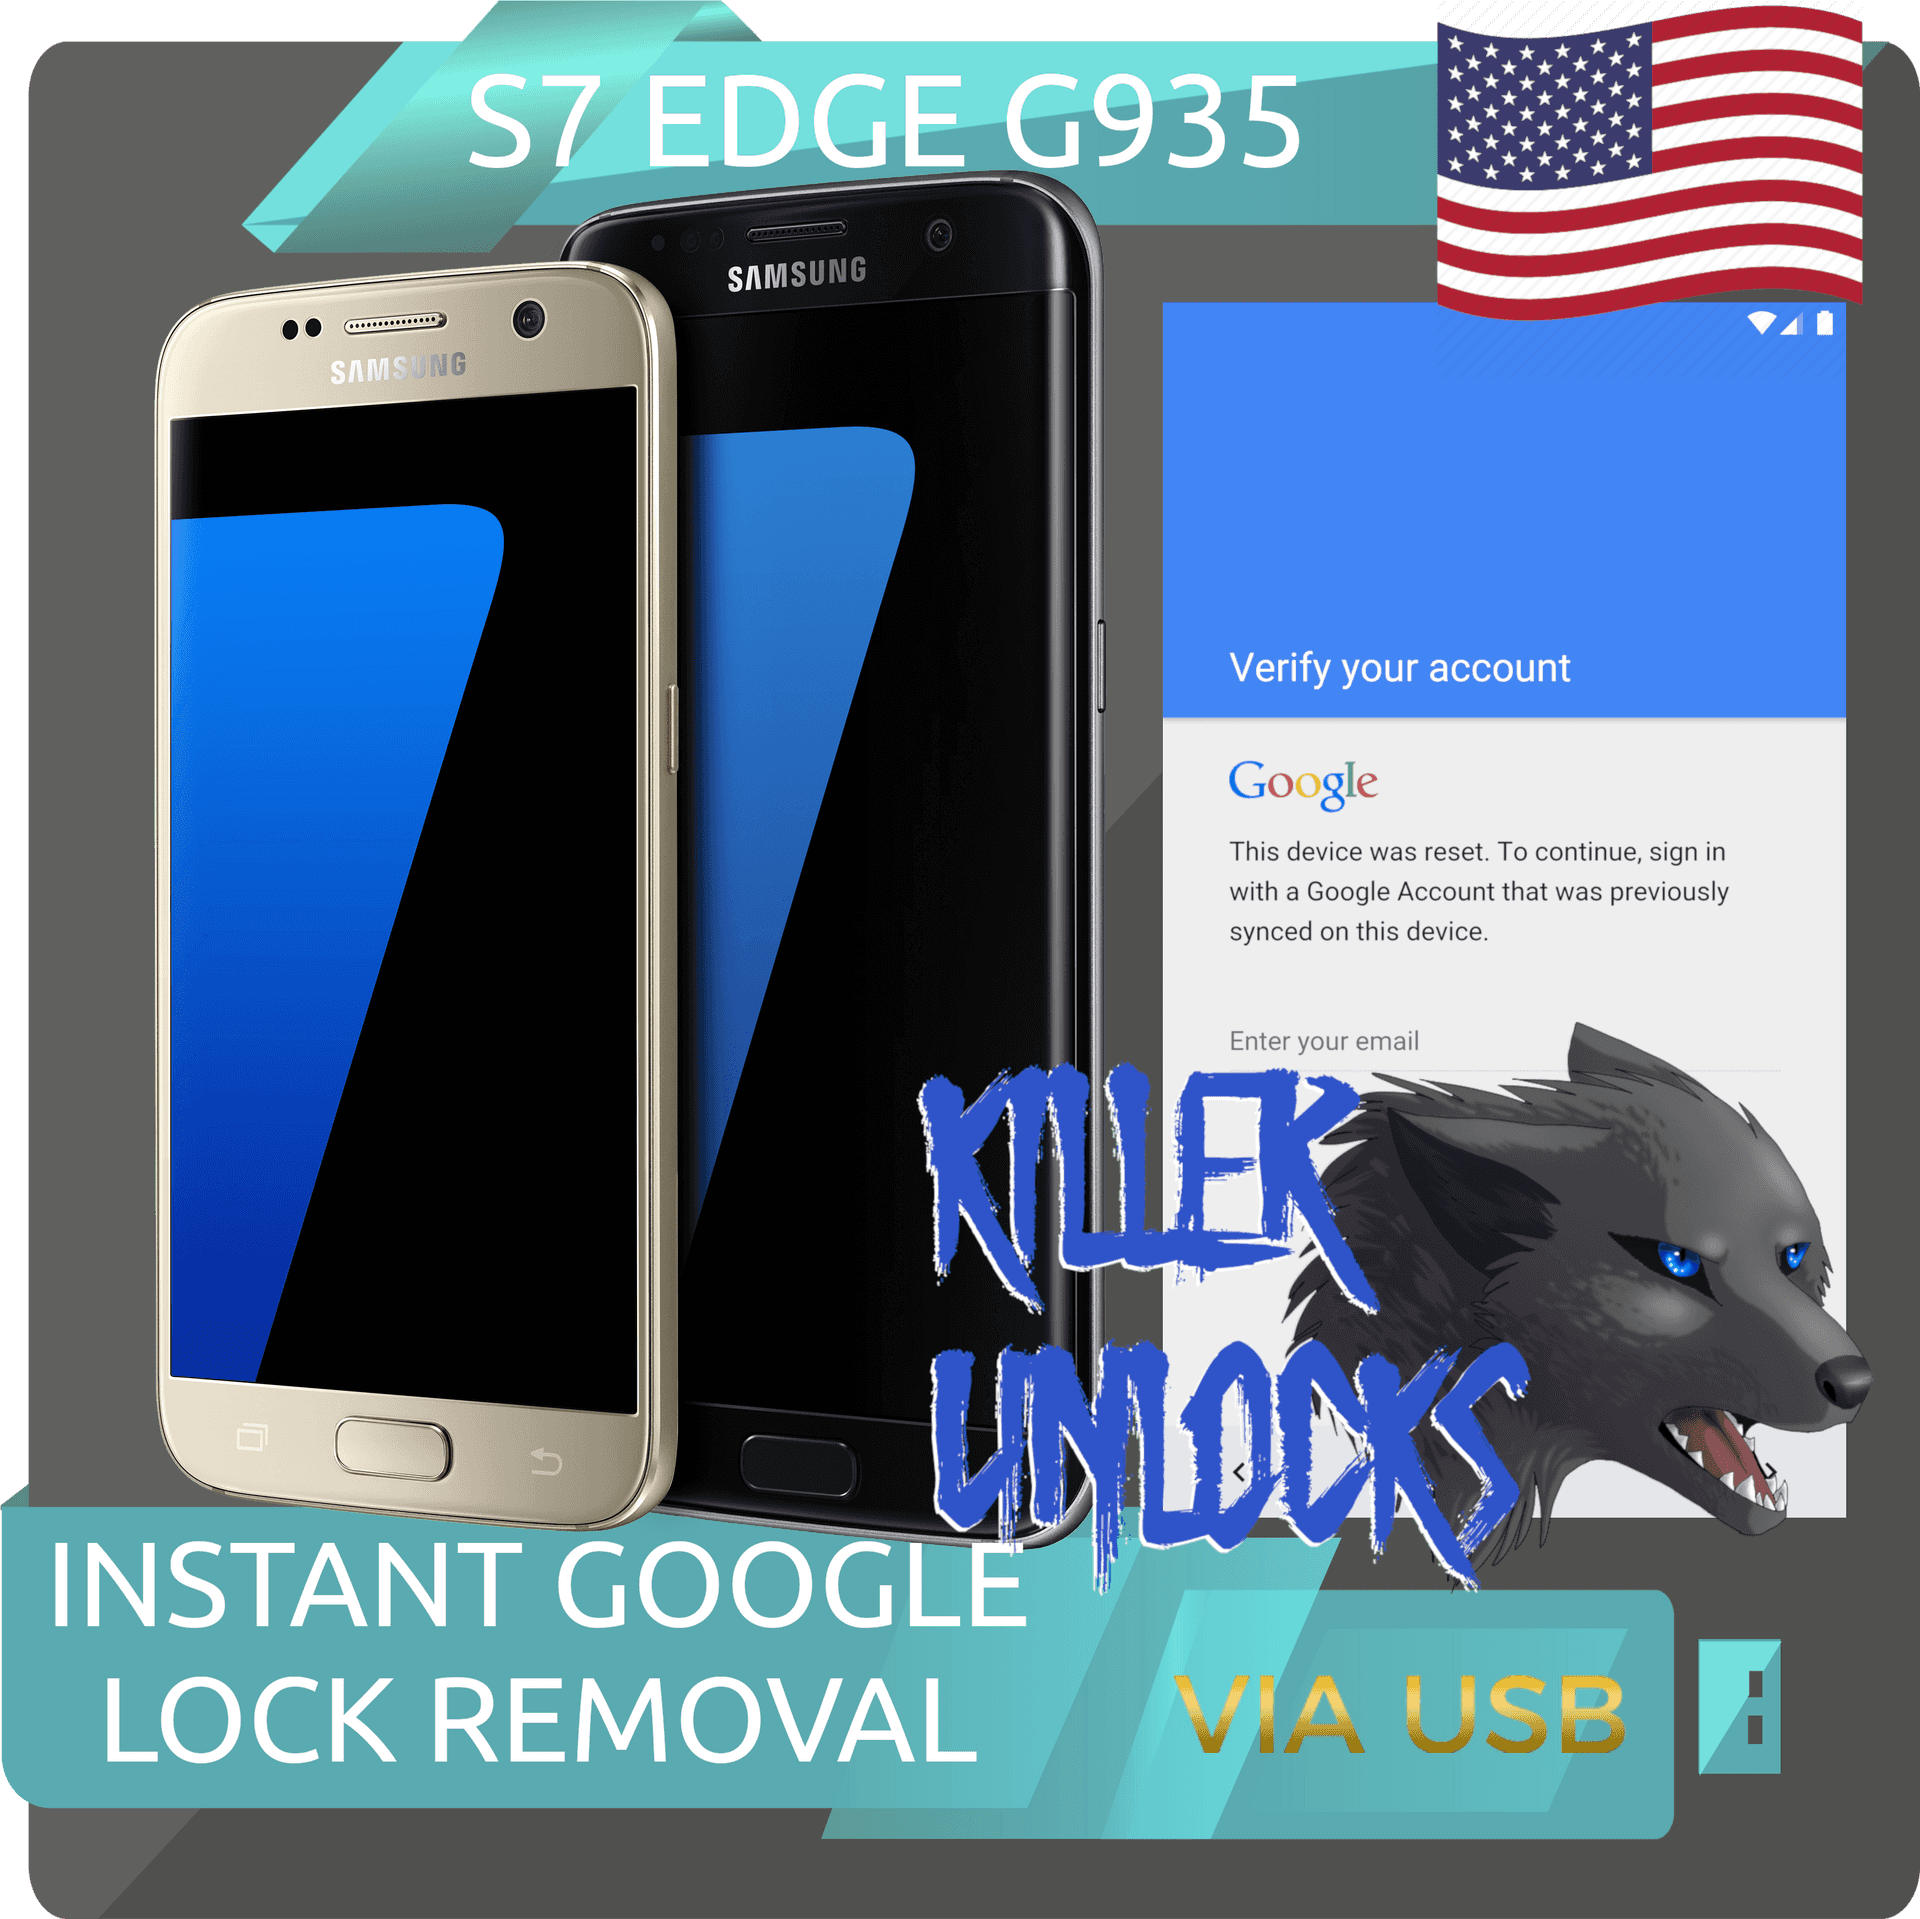 Samsung S7 Edge G935 Google Lock Removal Ad PNG